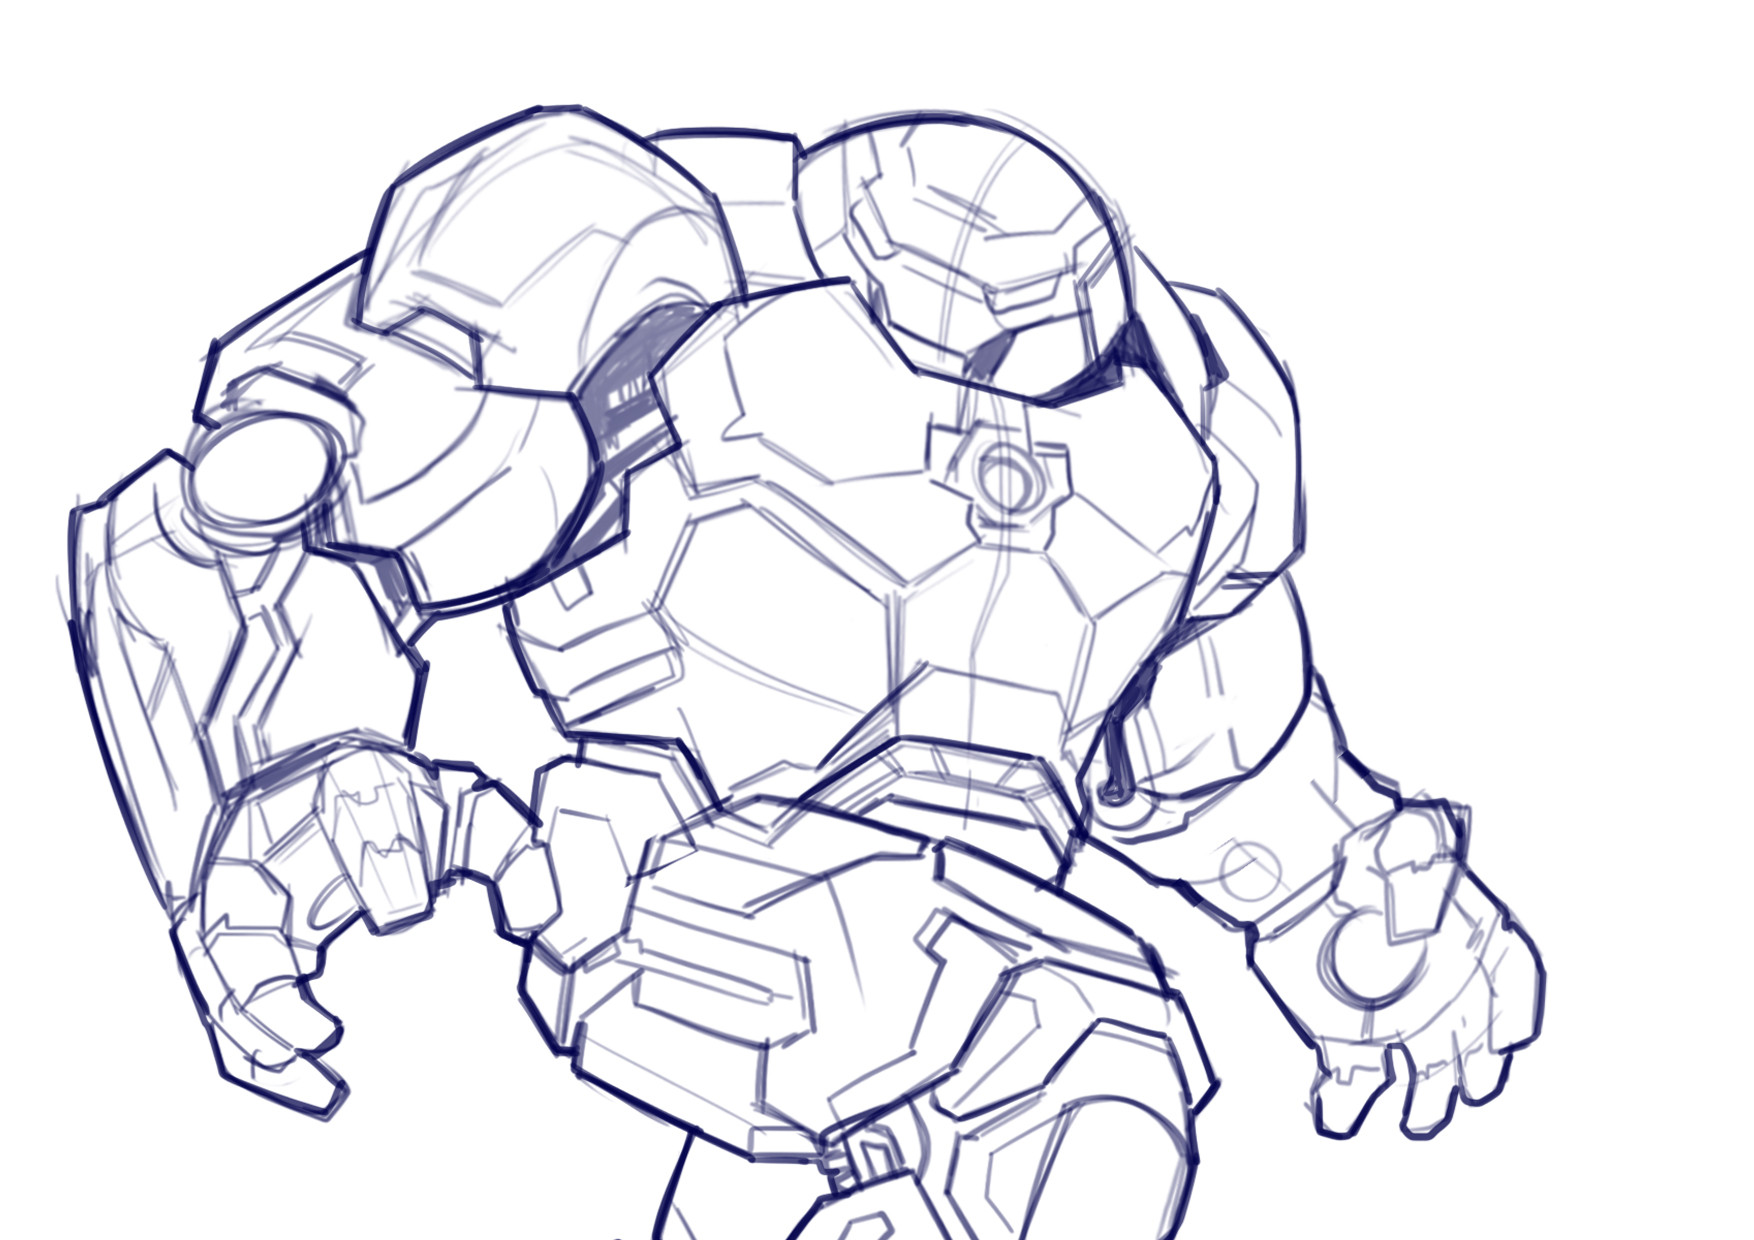 How To Draw Hulkbuster Step By Step Full Body We will guide you through